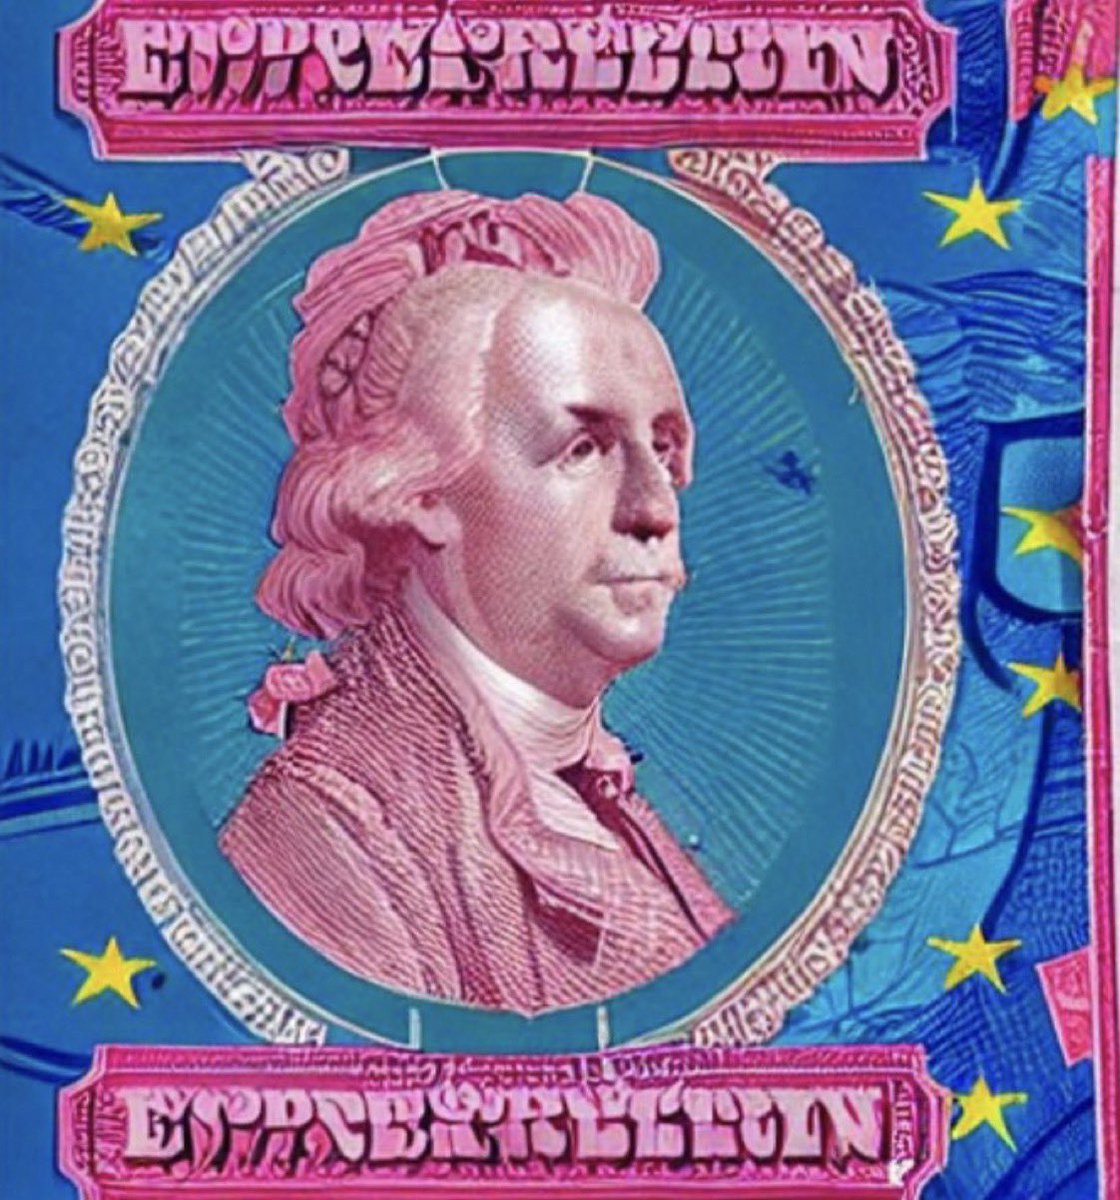 Stable Diffusion rendition of the Eurodollar-themed chewing gum that apparently existed in the ‘60’s, and was mentioned in the most recent episode of Odd Lots by Josh Younger.